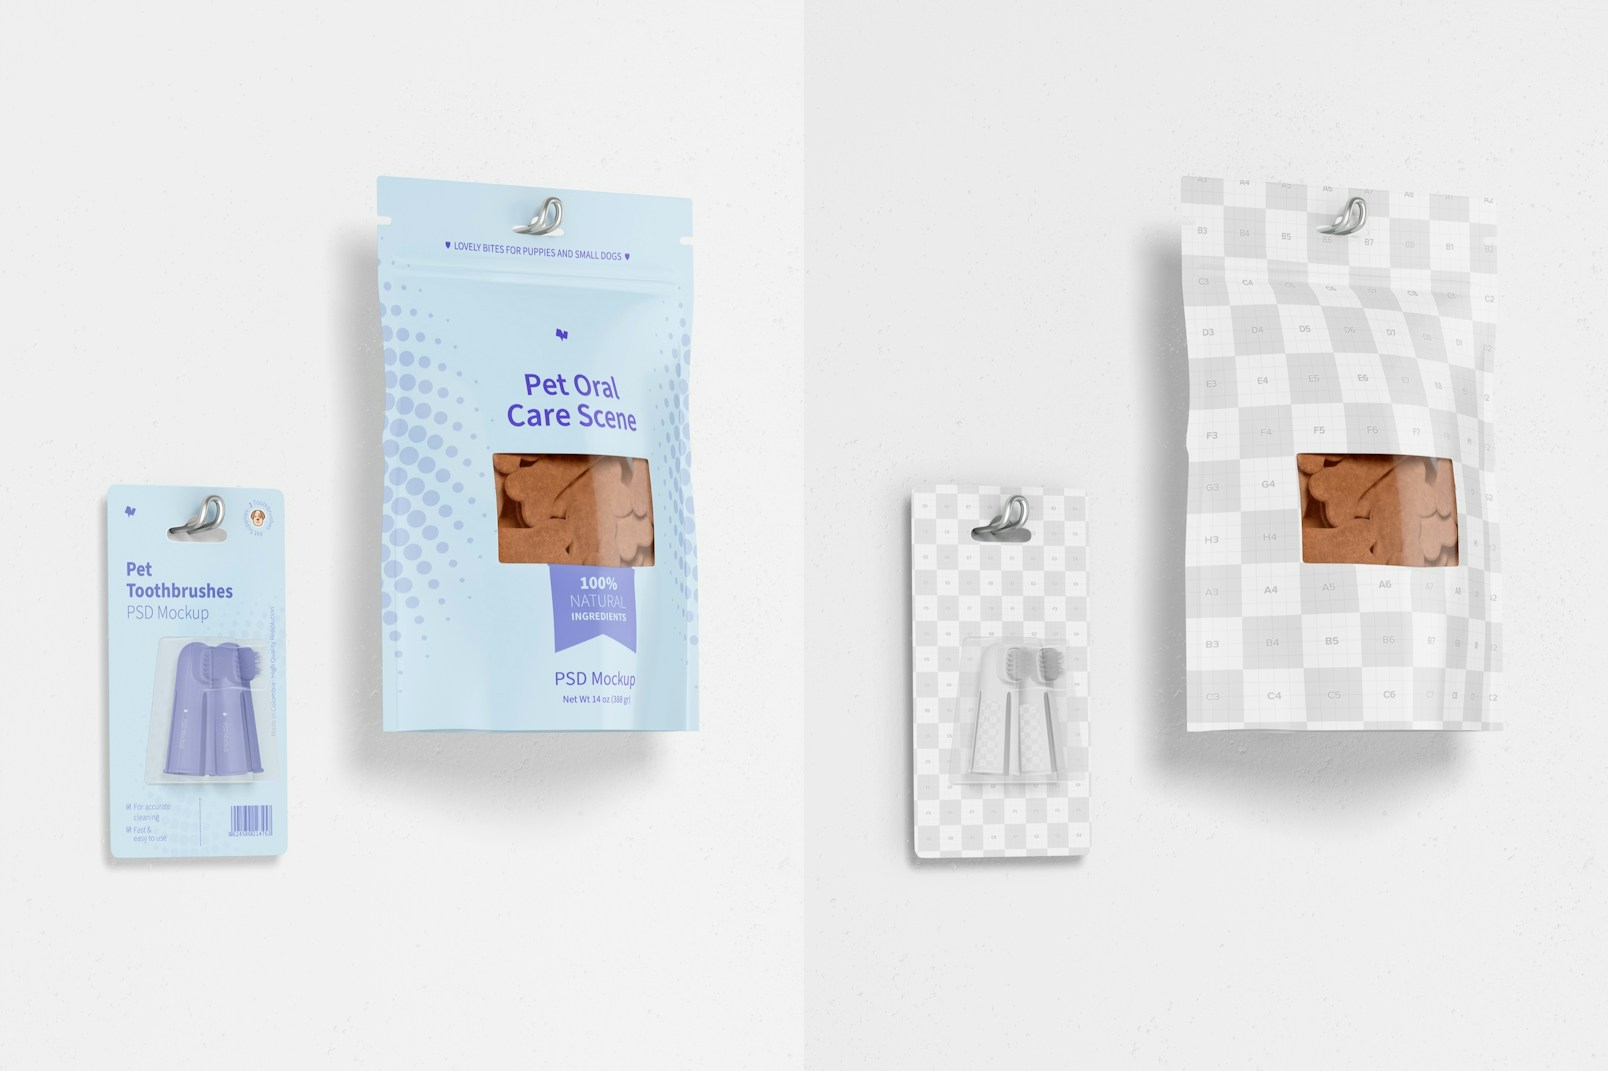 Pet Oral Care Scene Mockup, Hanging on Wall